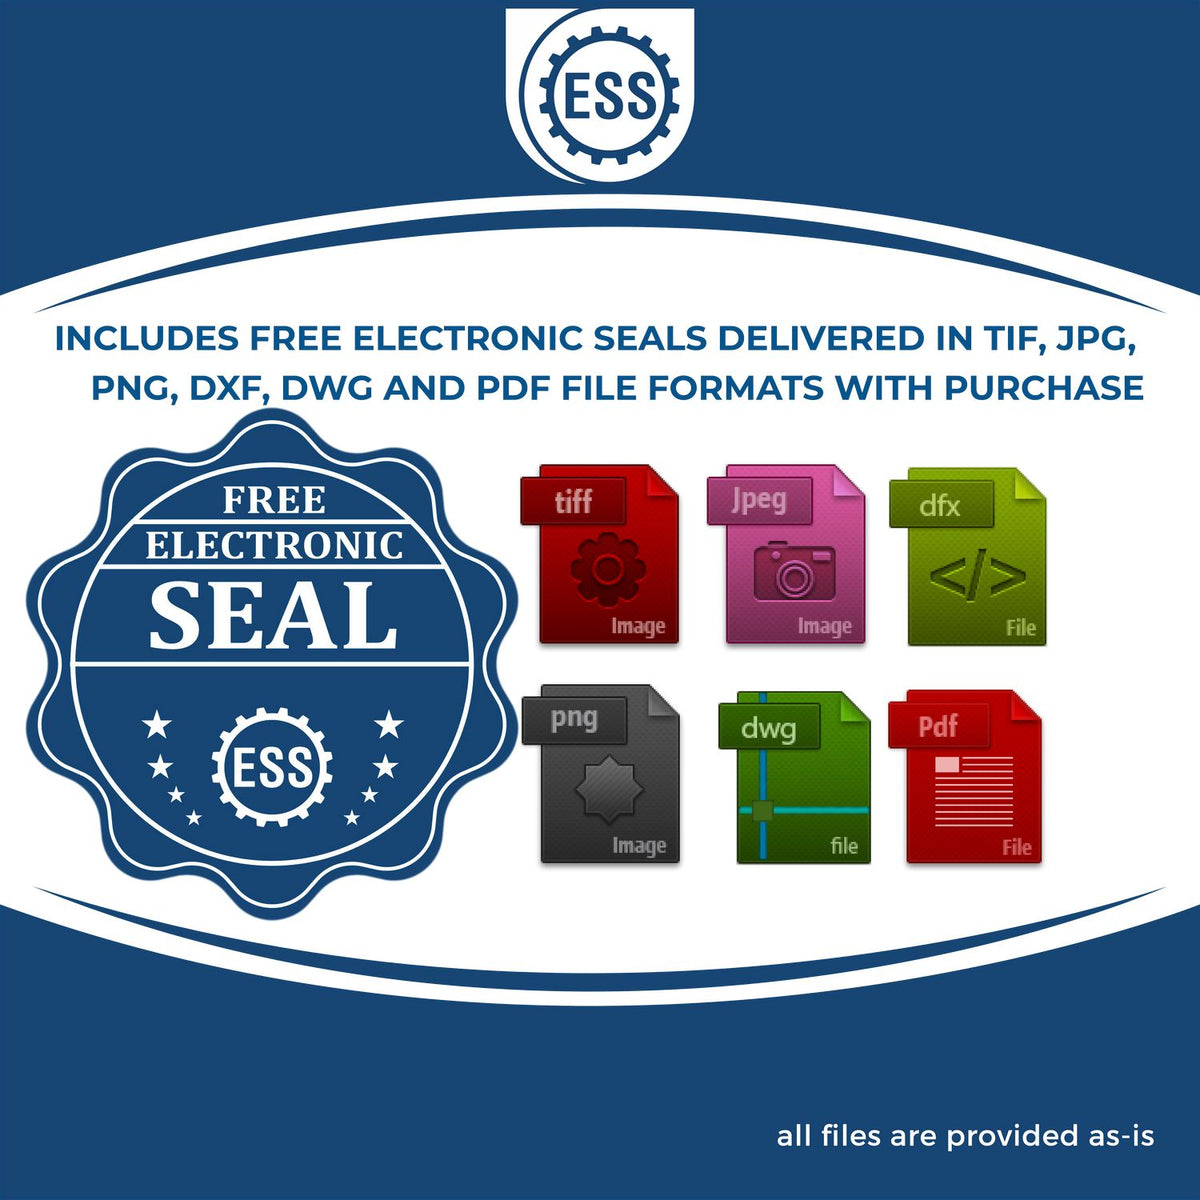 An infographic for the free electronic seal for the Premium MaxLight Pre-Inked Illinois Landscape Architectural Stamp illustrating the different file type icons such as DXF, DWG, TIF, JPG and PNG.